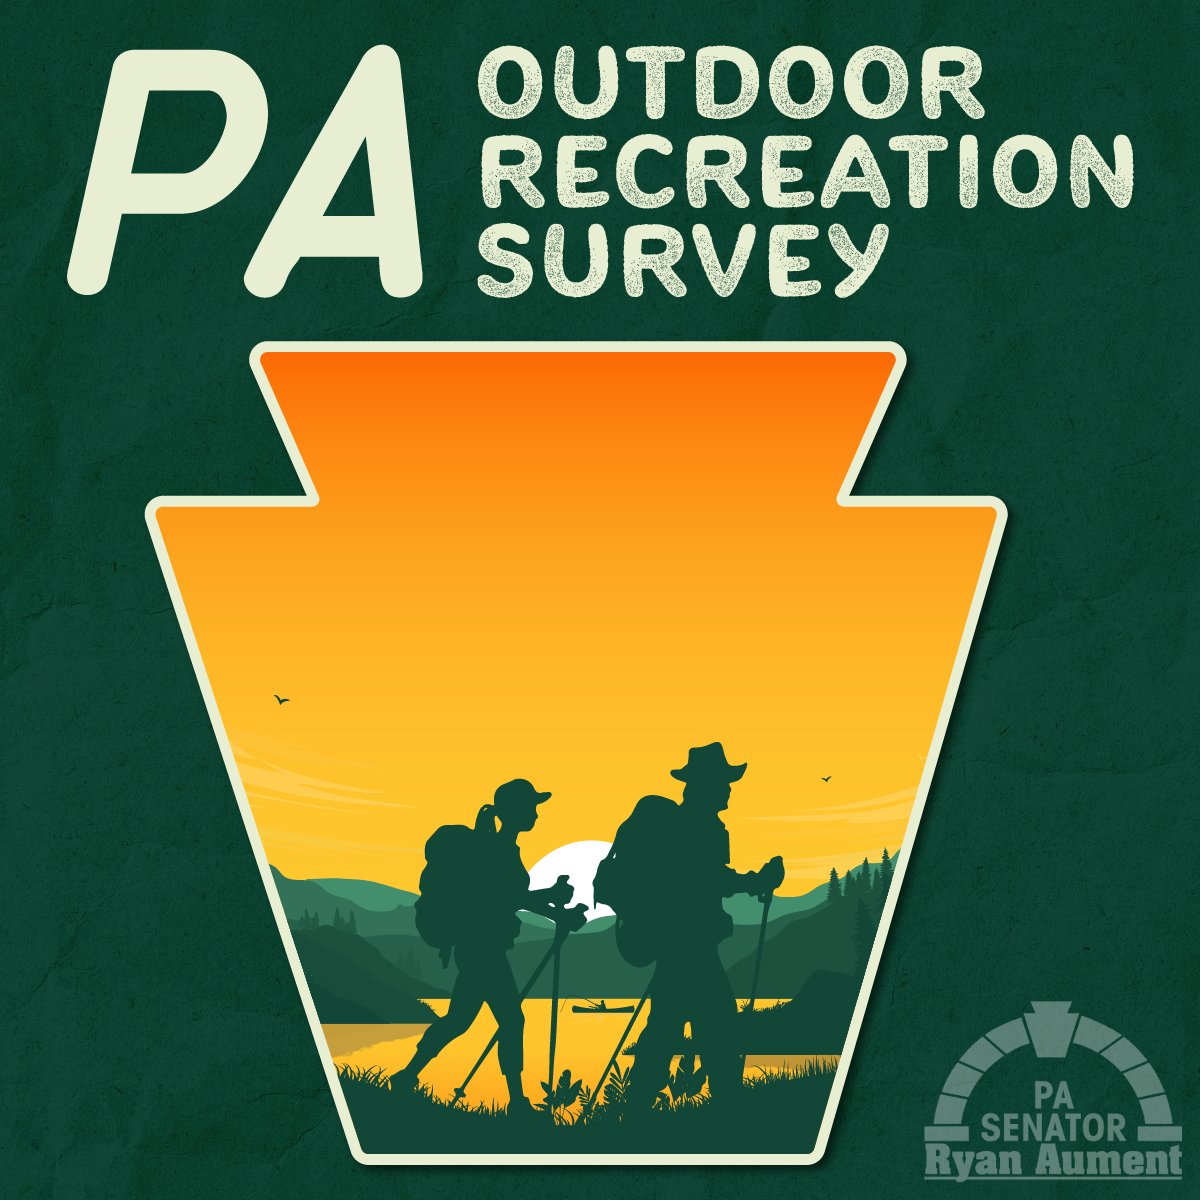 🚴‍♀️🛶⛺️ You can share your outdoor interests and activities in a 10-minute, online survey that will assist @DCNRnews with developing the next PA outdoor recreation plan. Survey ends May 22: bit.ly/4dnNoN6